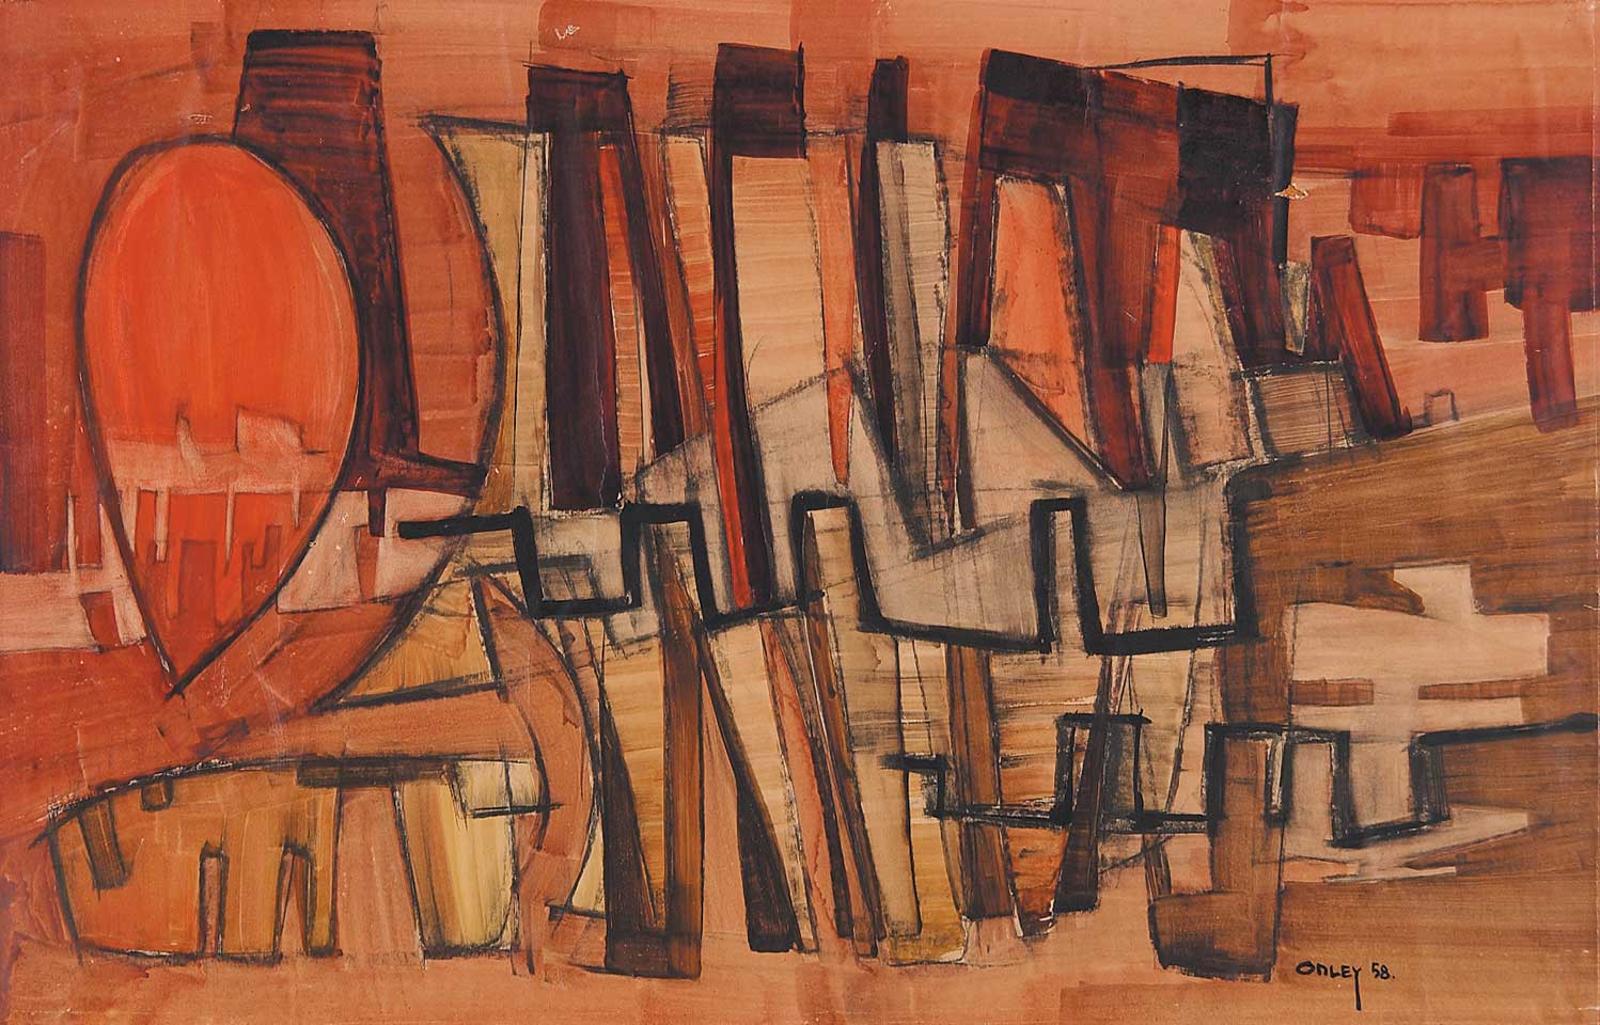 Norman Anthony (Toni) Onley (1928-2004) - Untitled - Abstract in Red and Brown